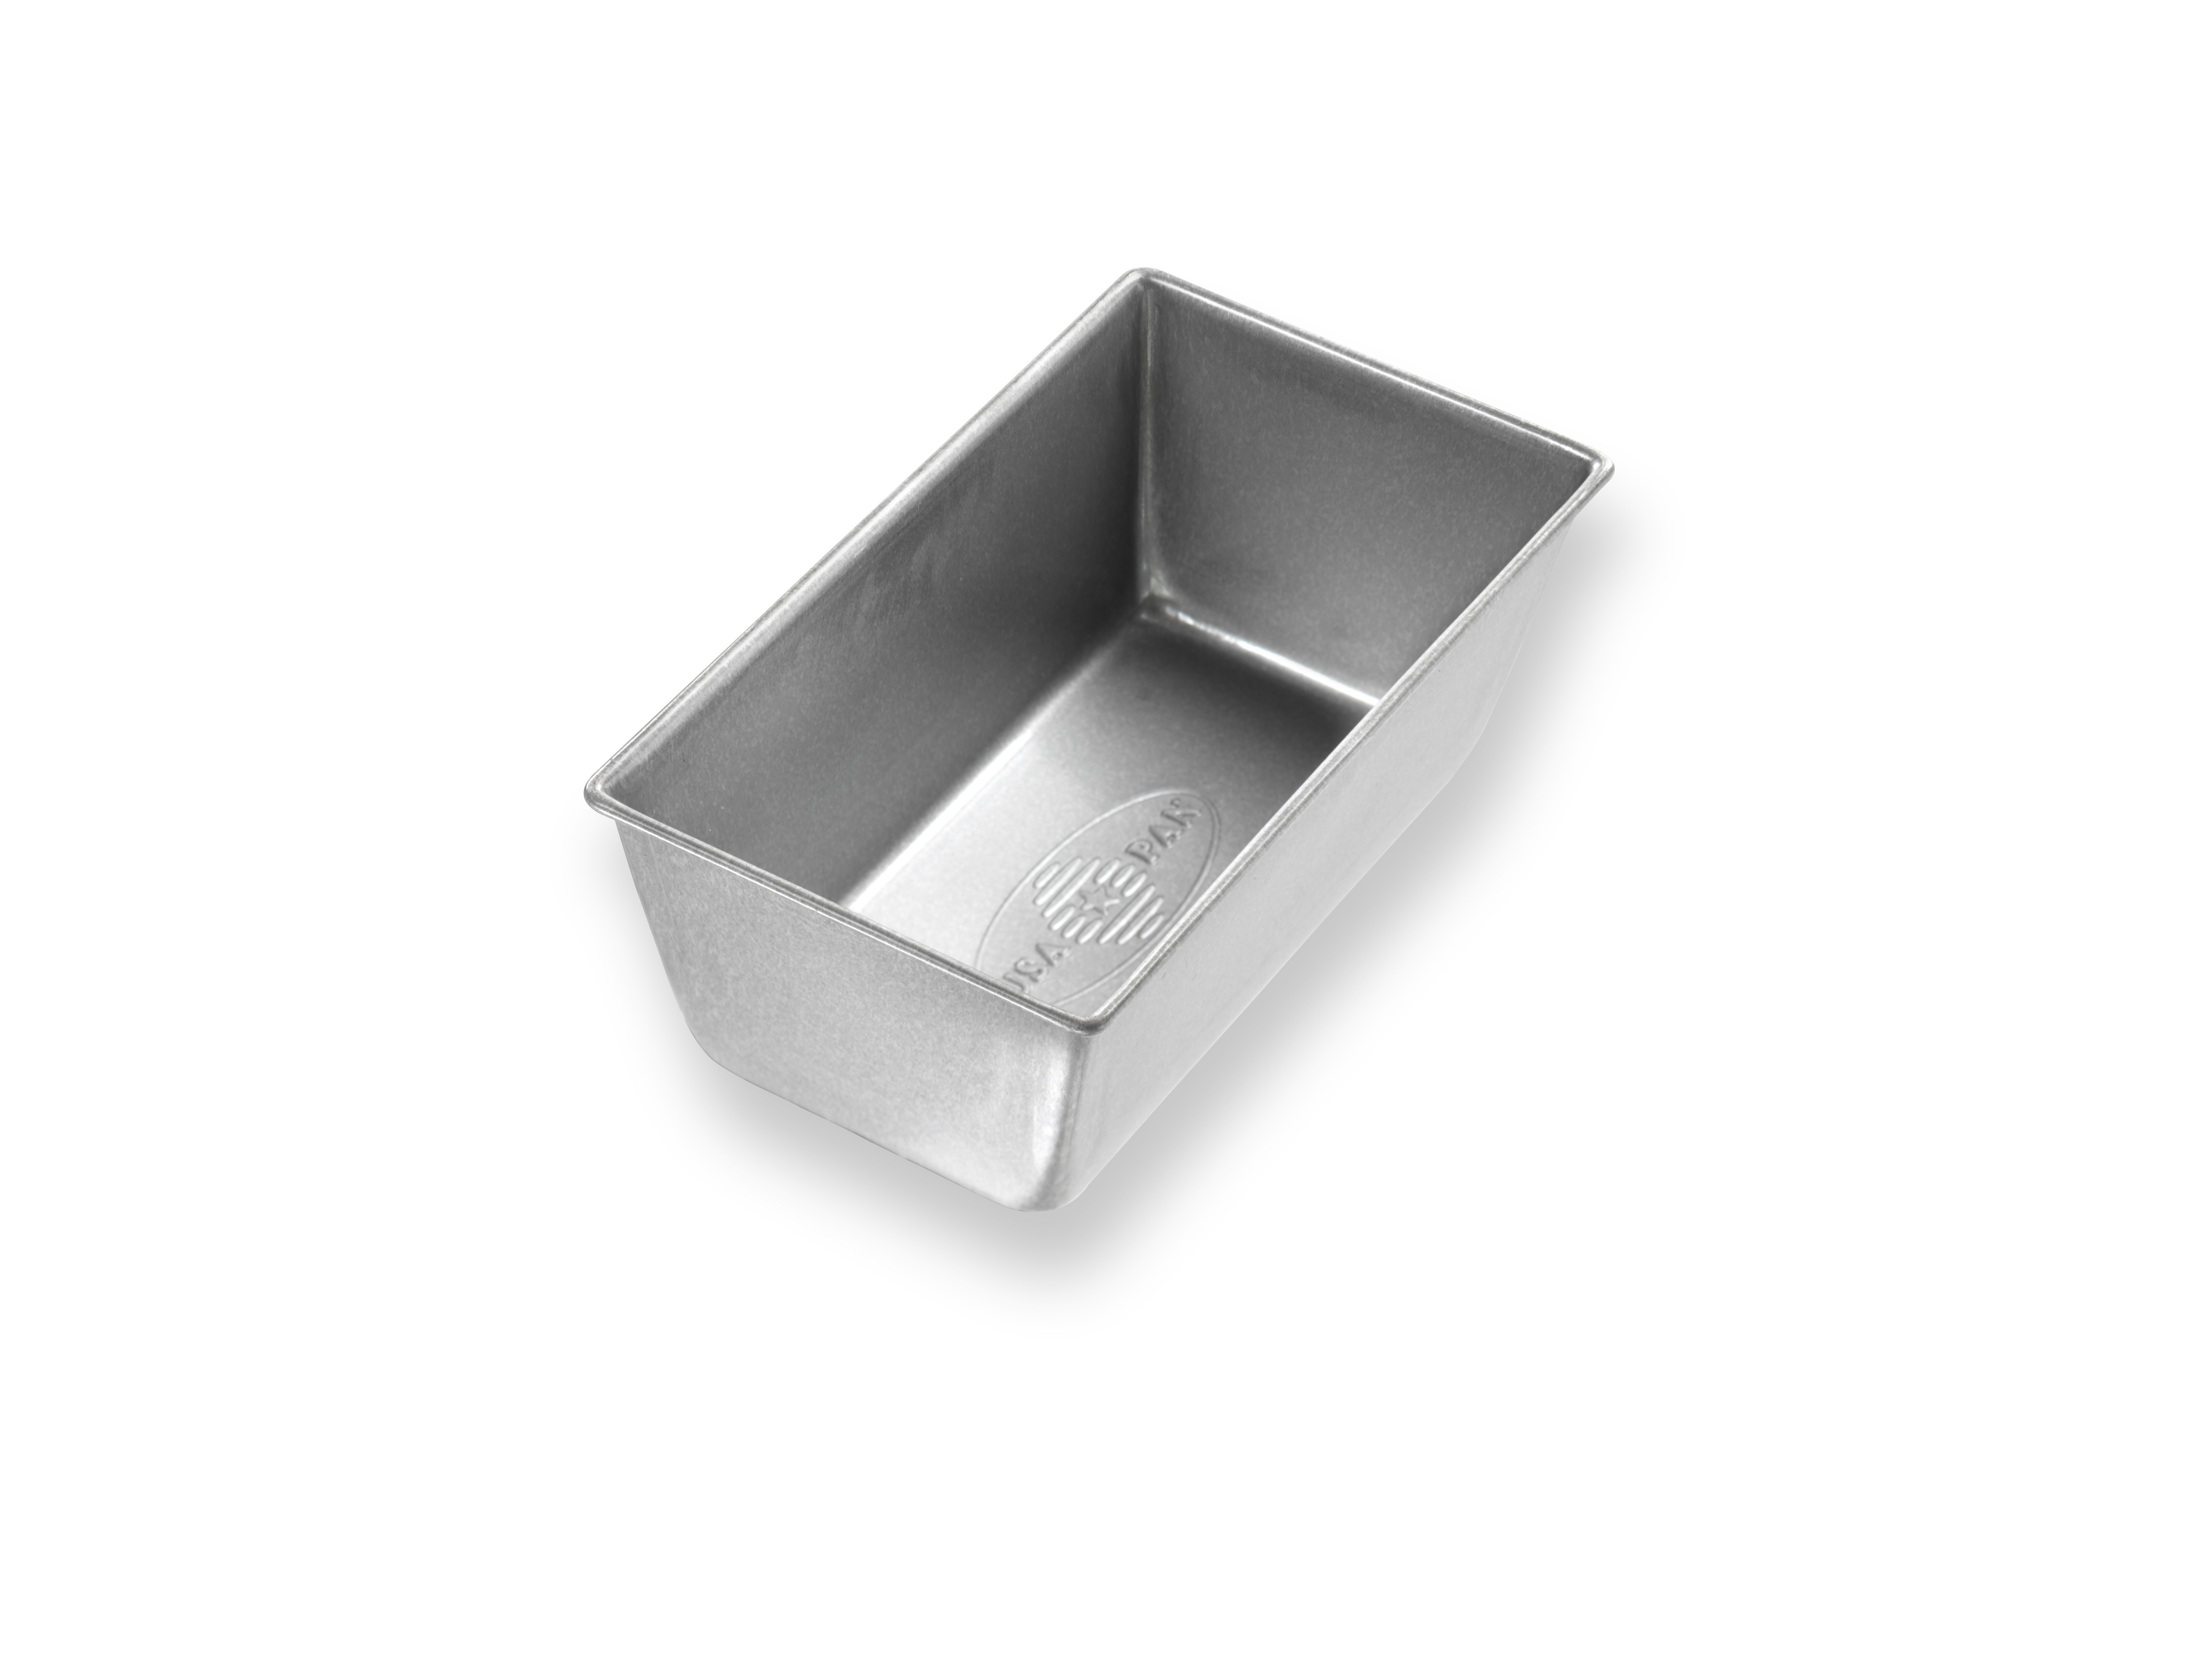 USA Pans Mini Loaf Pan, Set of 4 - Spoons N Spice